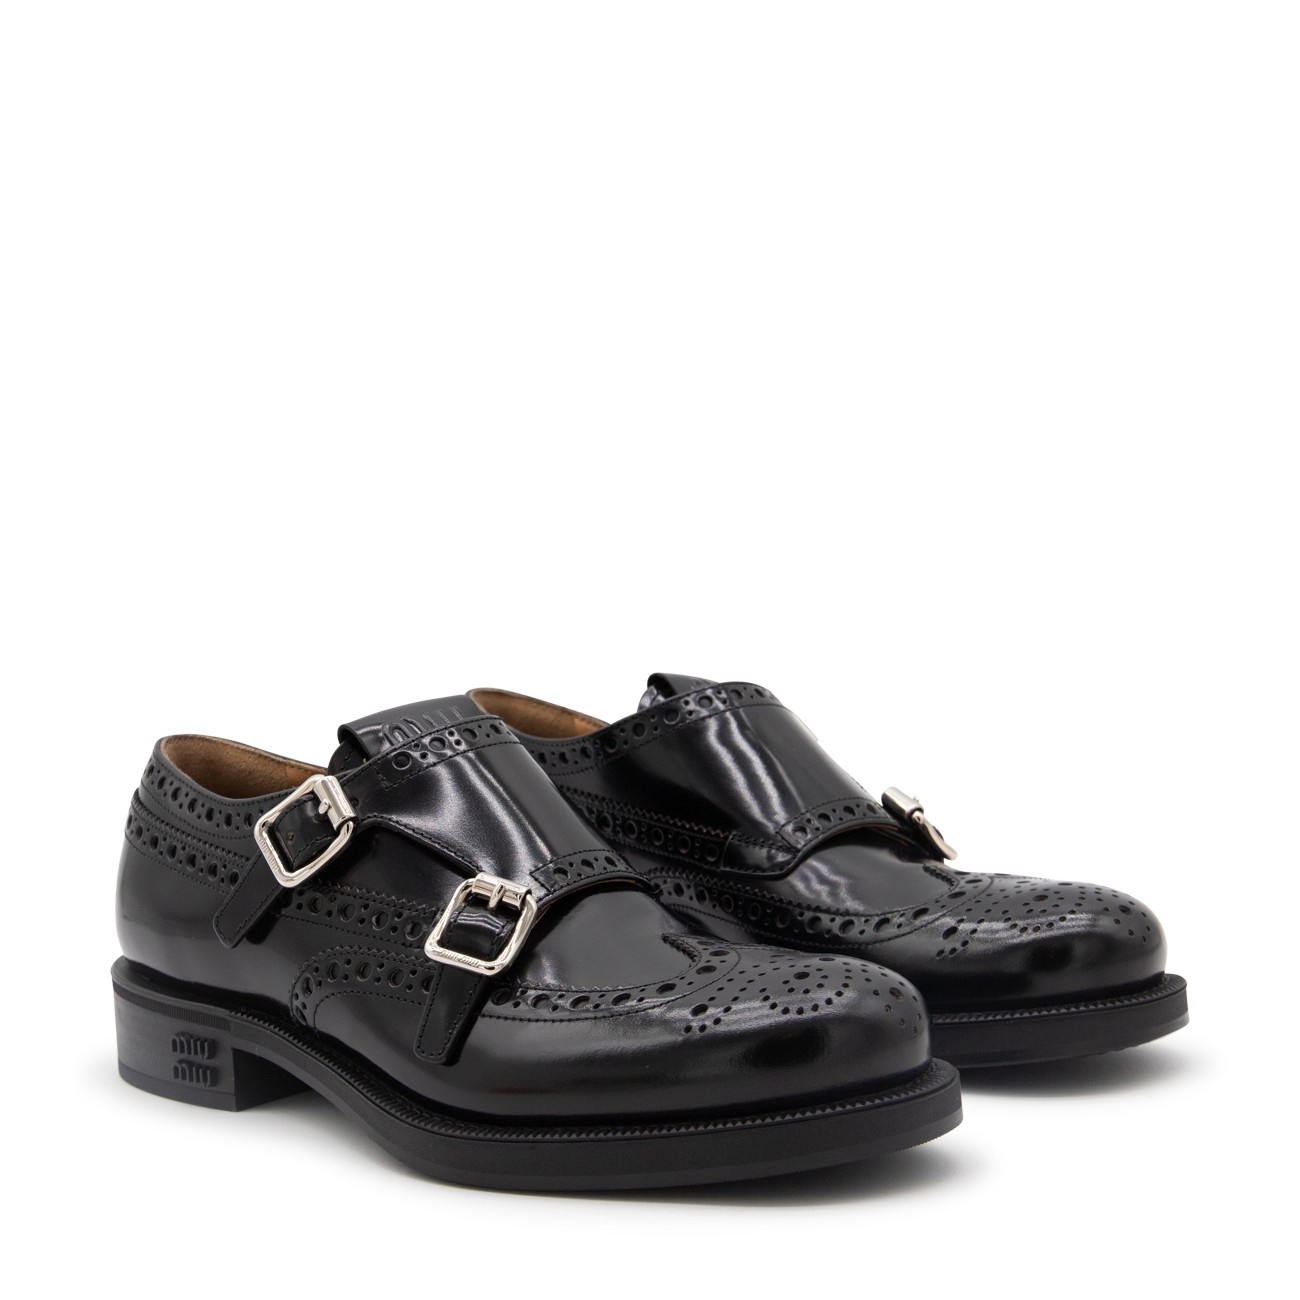 black leather formal shoes - 2